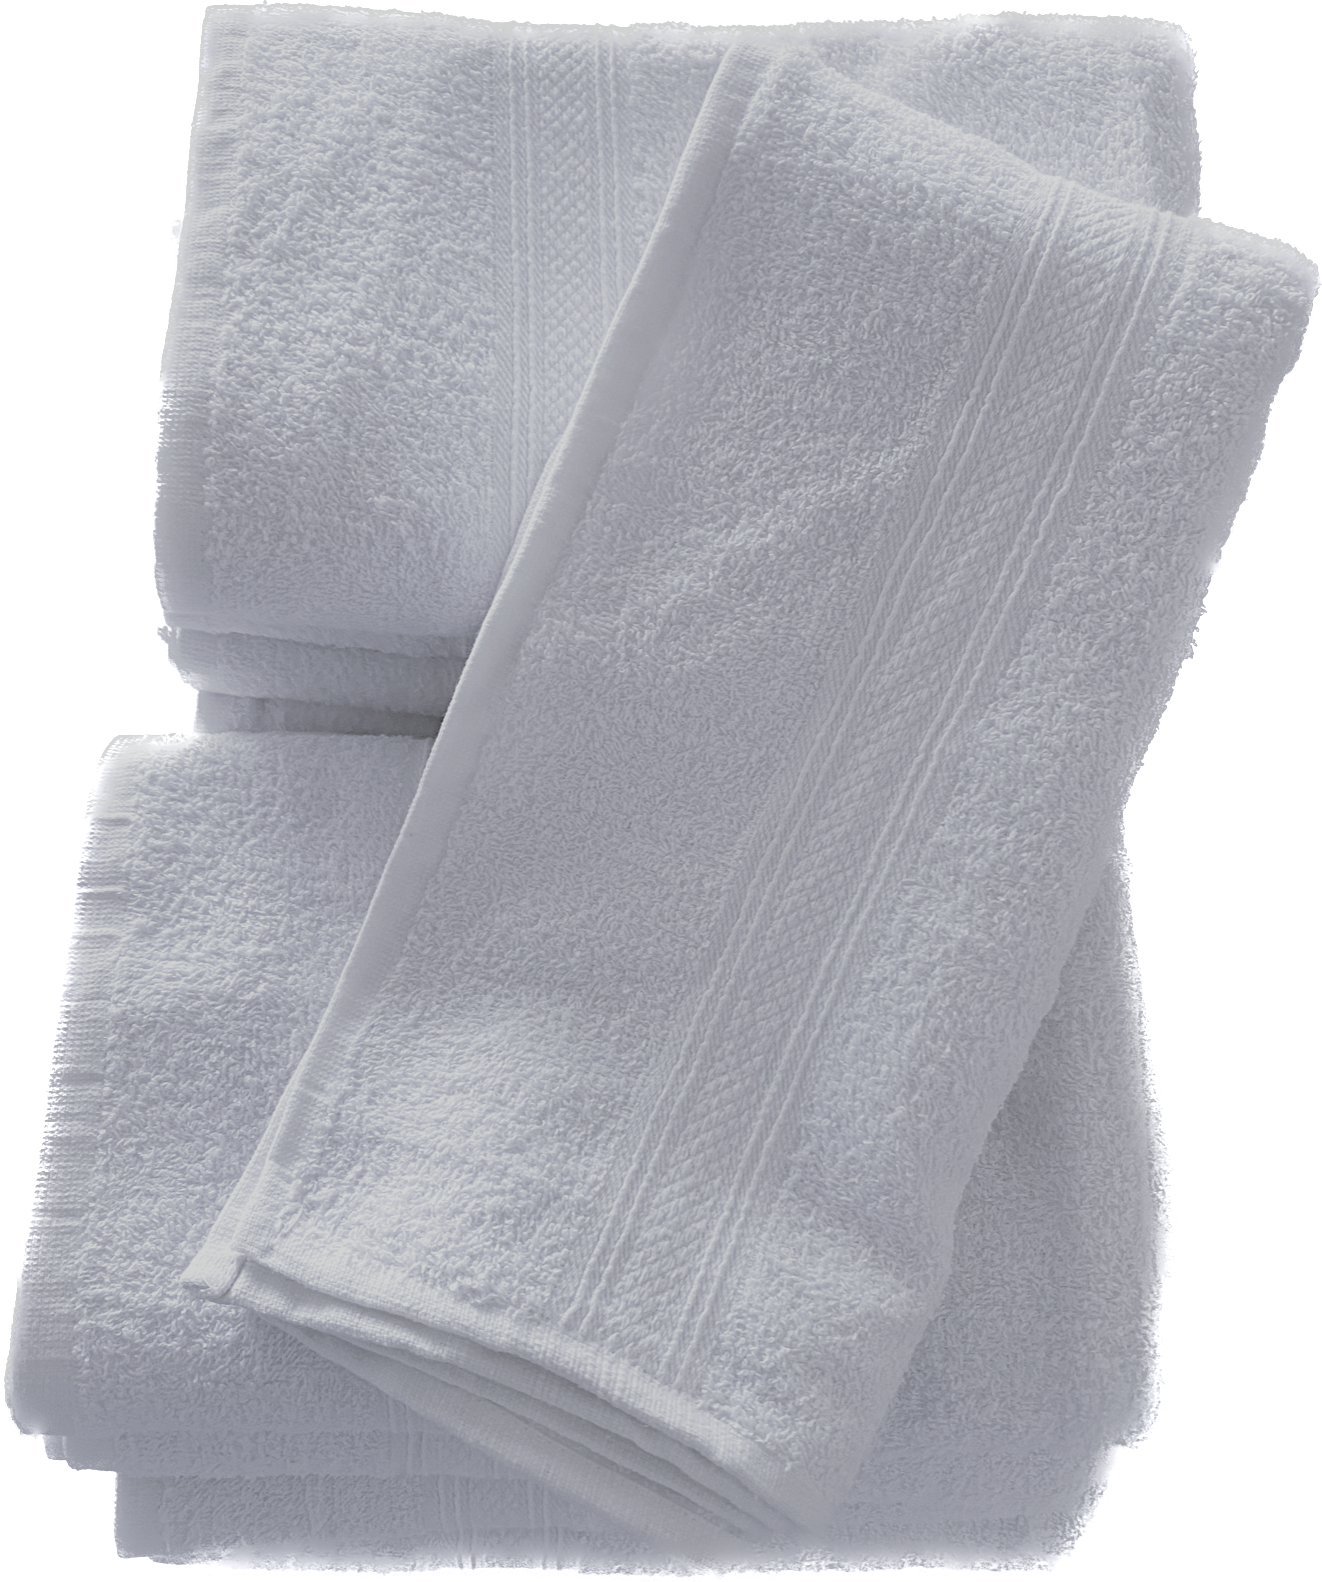 COTTON CRAFT- Euro Spa Set of 4 Luxury Waffle Weave Bath Towels, Oversized  Pure Ringspun Cotton, 30 inch x 56 inch, White 4 Pack Bath Towel White